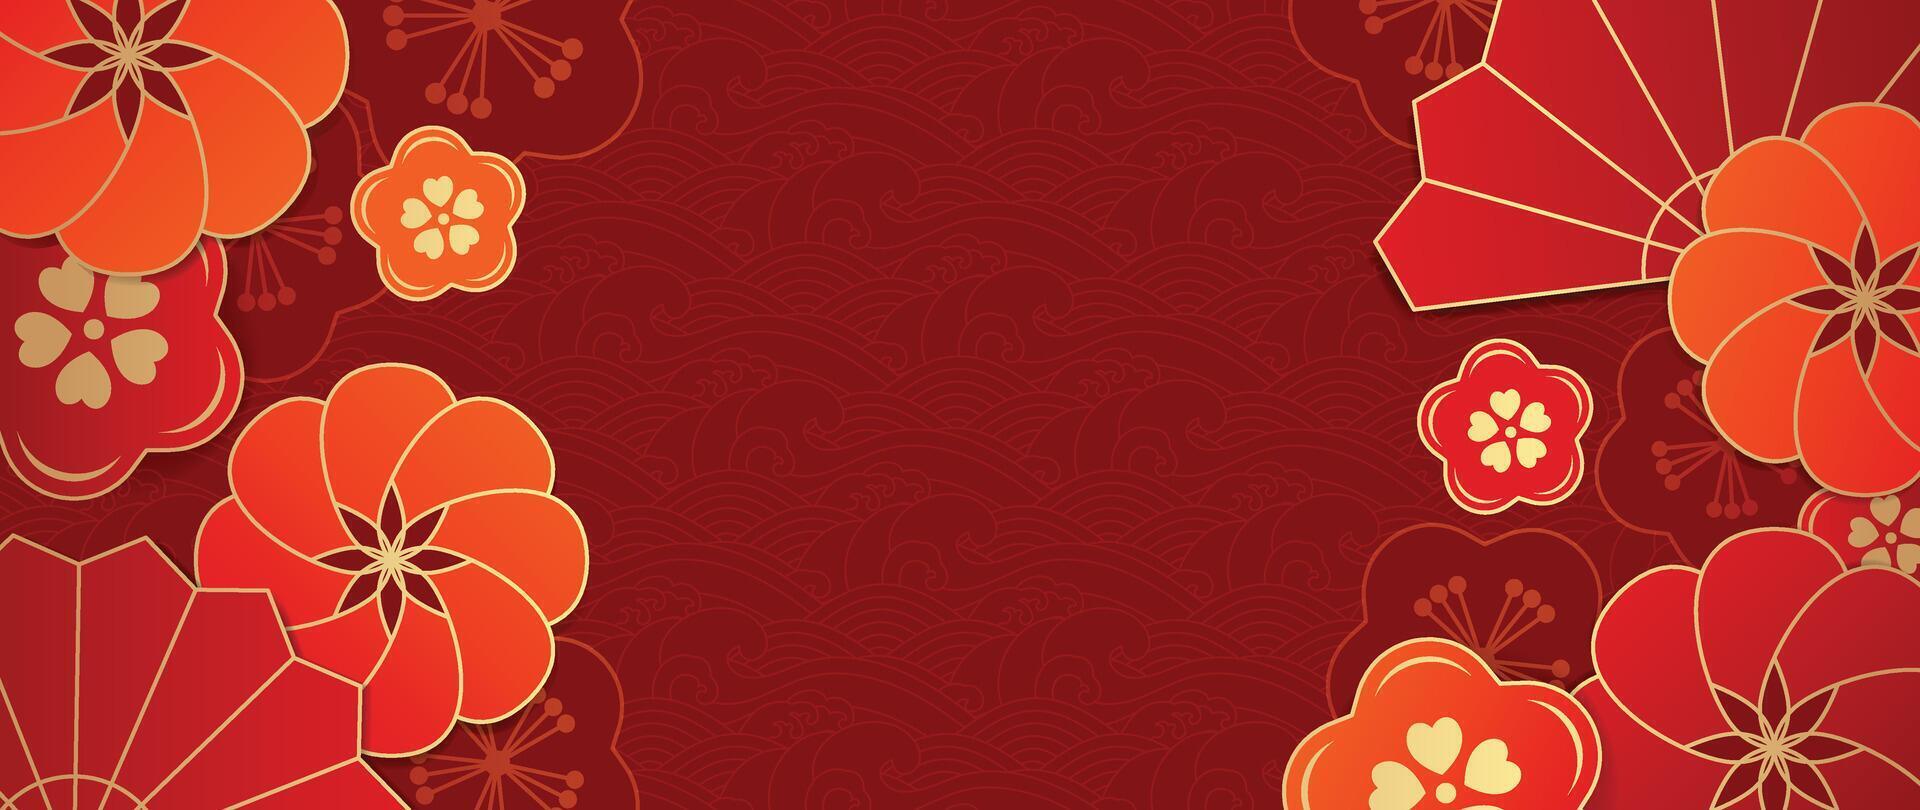 Happy Chinese new year backdrop vector. Wallpaper design with sea wave pattern, flower on red background. Modern luxury oriental illustration for cover, banner, website, decor, border, frame. vector